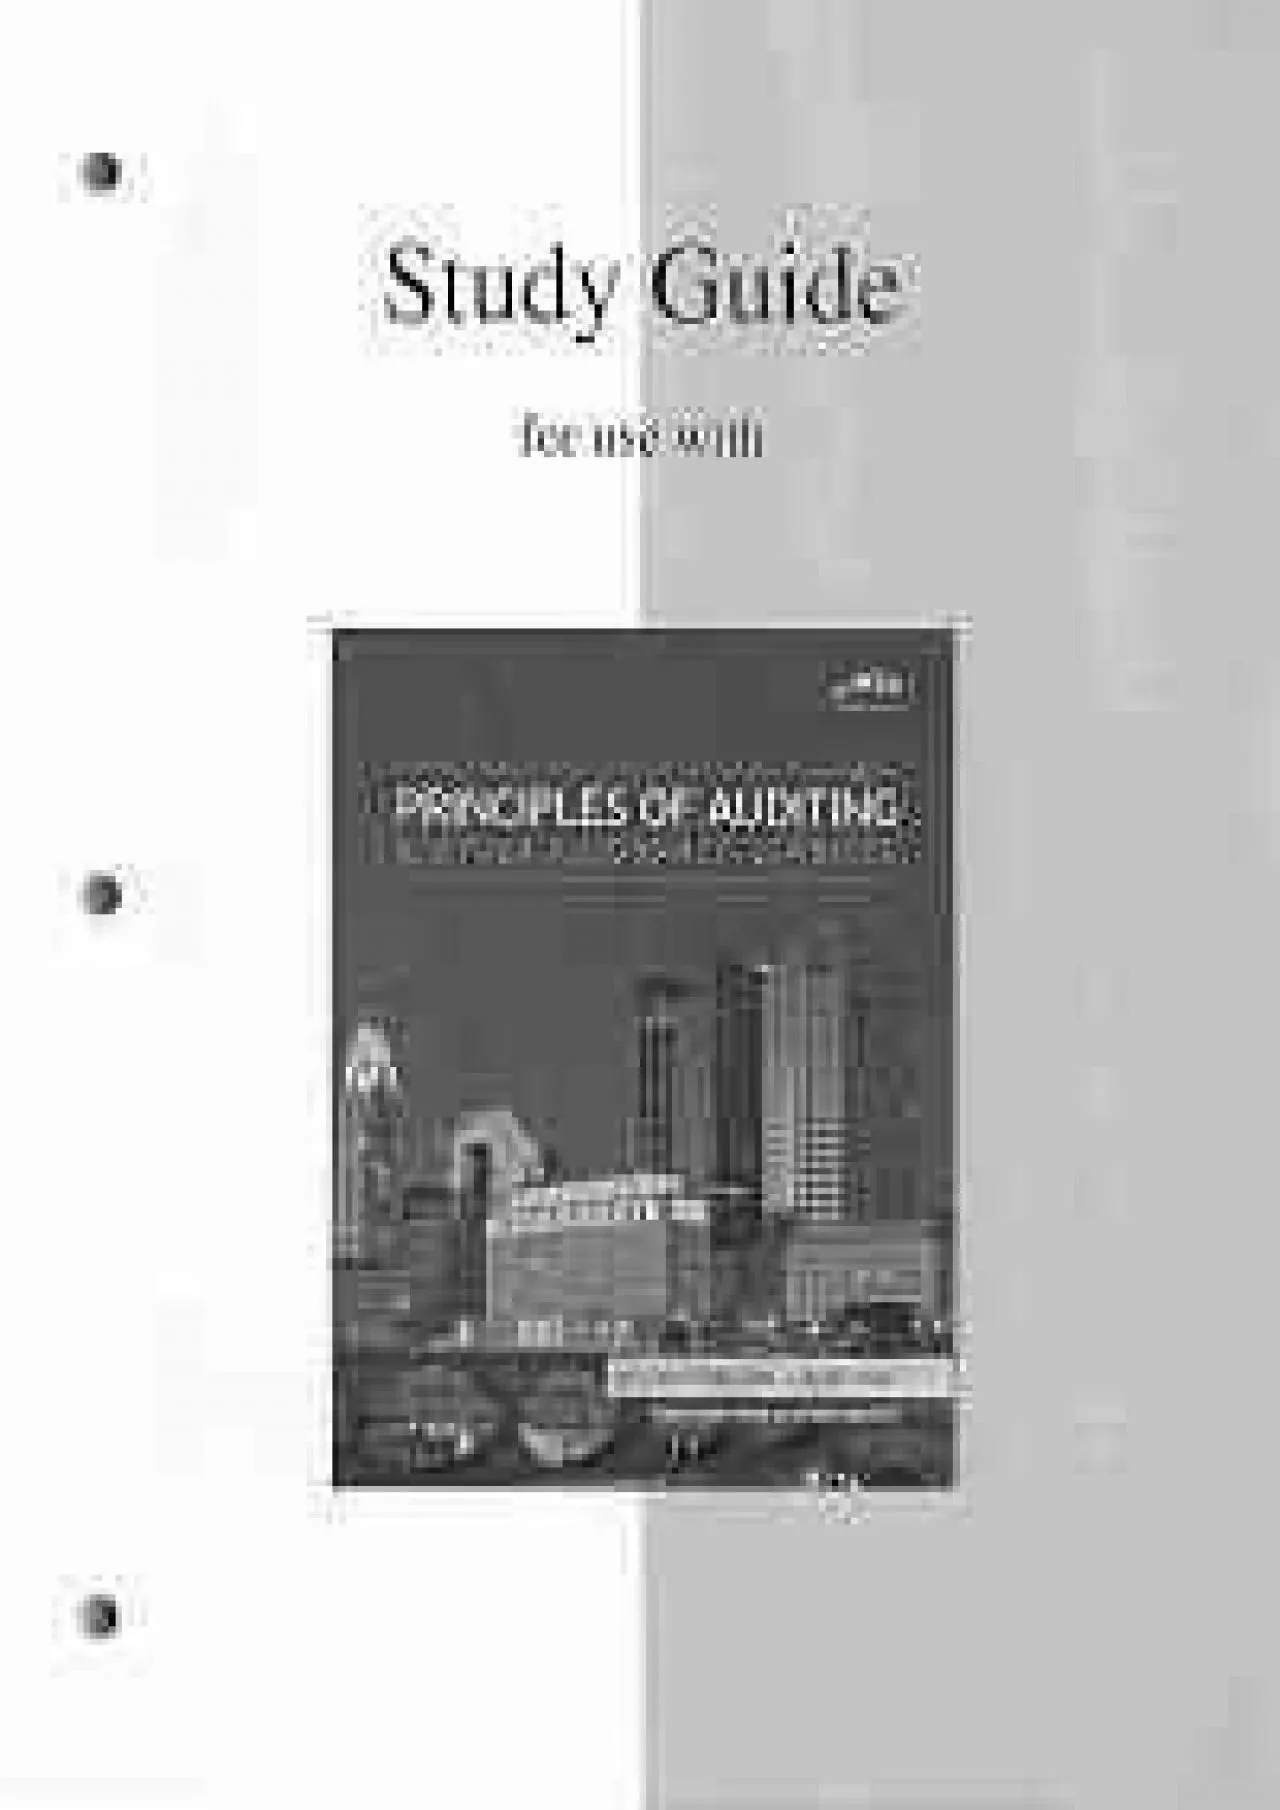 (BOOK)-Study Guide to accompany Principles of Auditing and Other Assurance Services